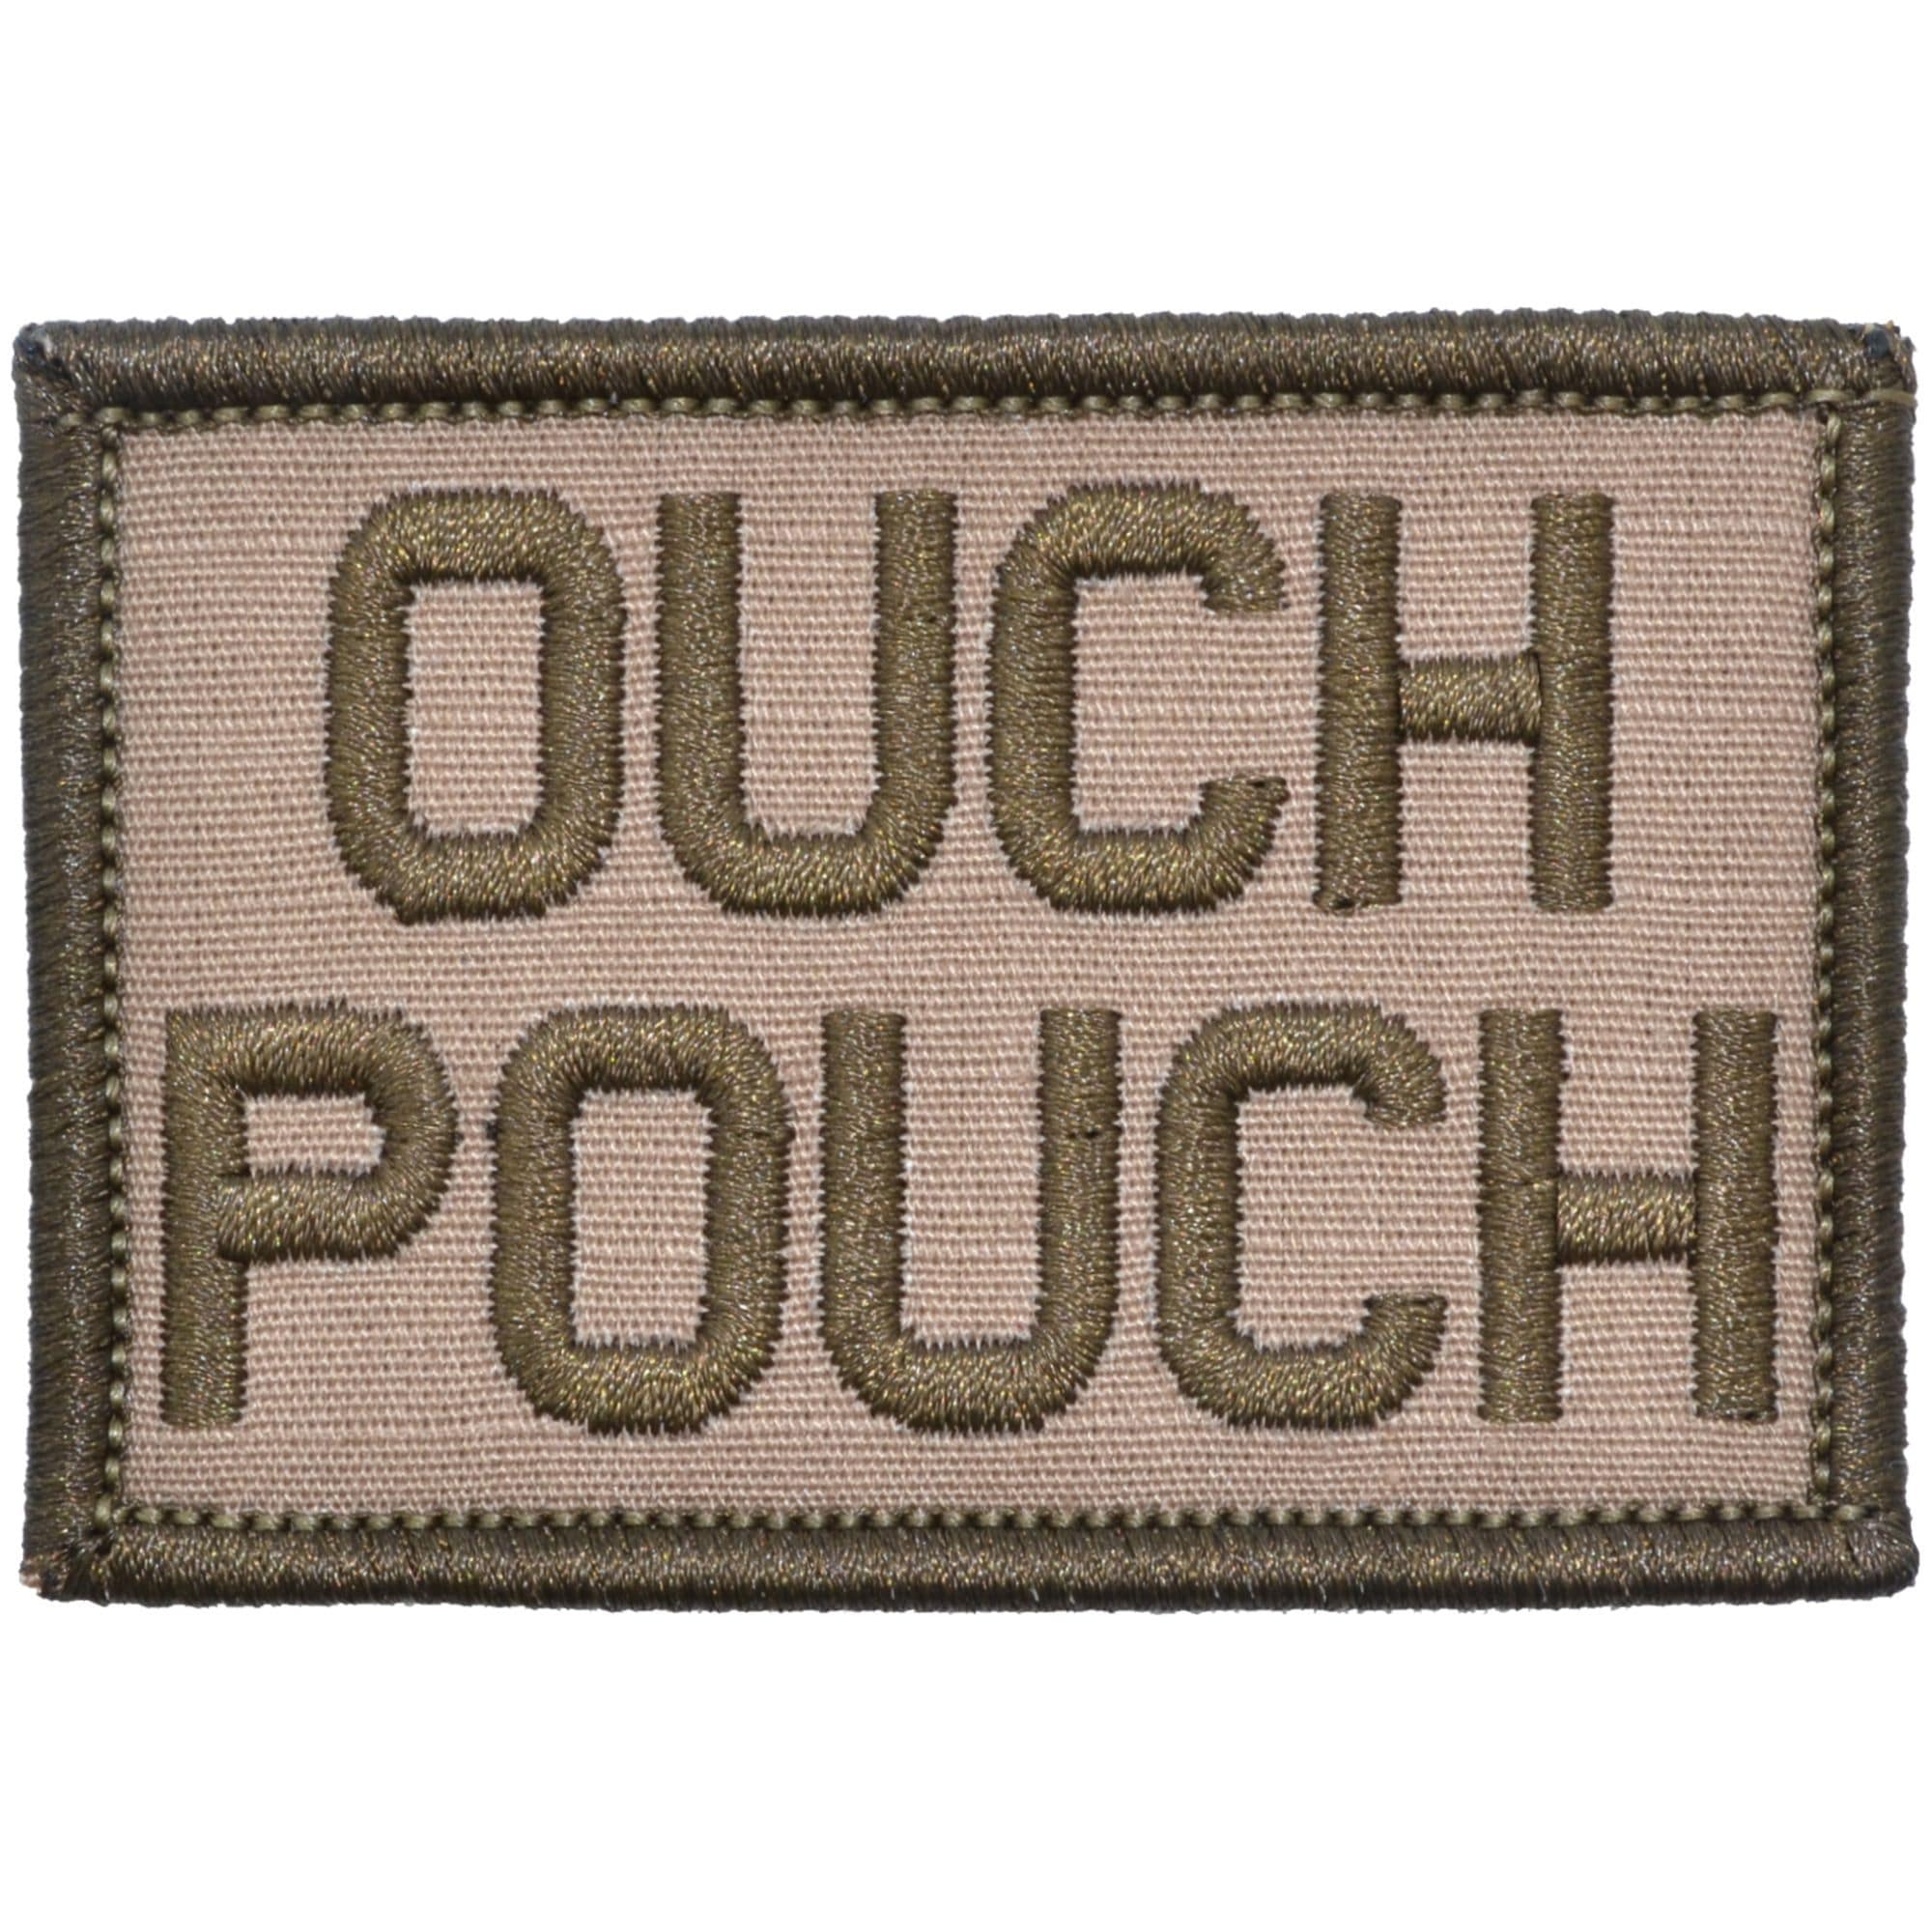 Ouch Pouch Multicam Patch Hook & Loop – Morale Patches Australia